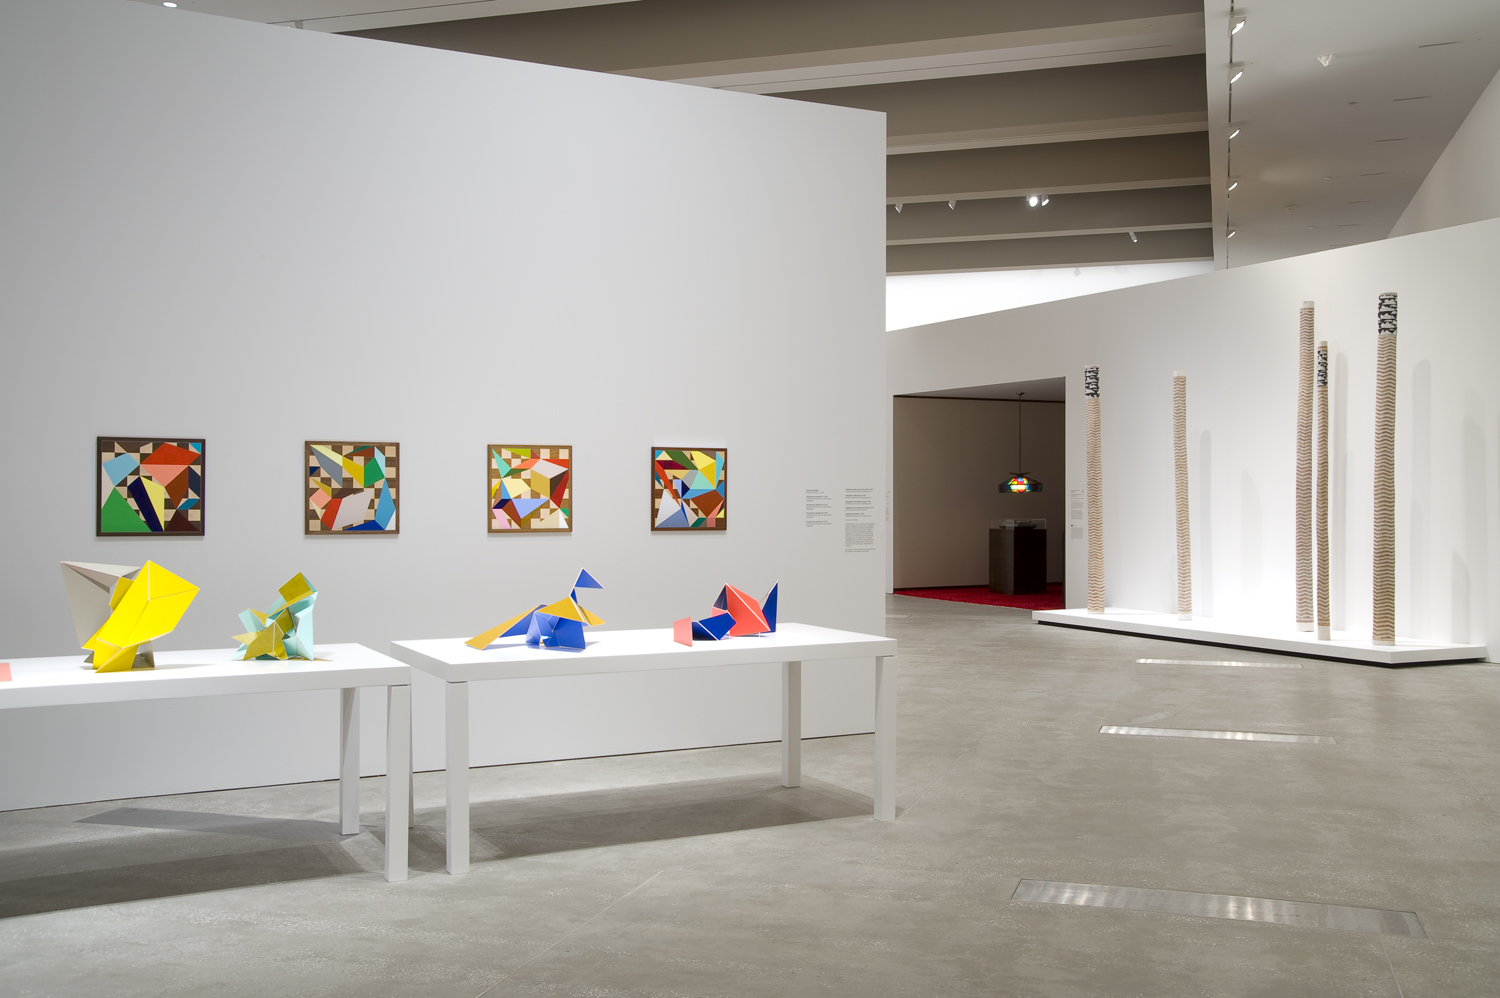   'Contemporary&nbsp;Australia: Optimism'&nbsp;&nbsp;2008  Gallery of Modern Art, Queensland Art Gallery, Brisbane Installation view Paintings and sculptures to the left 